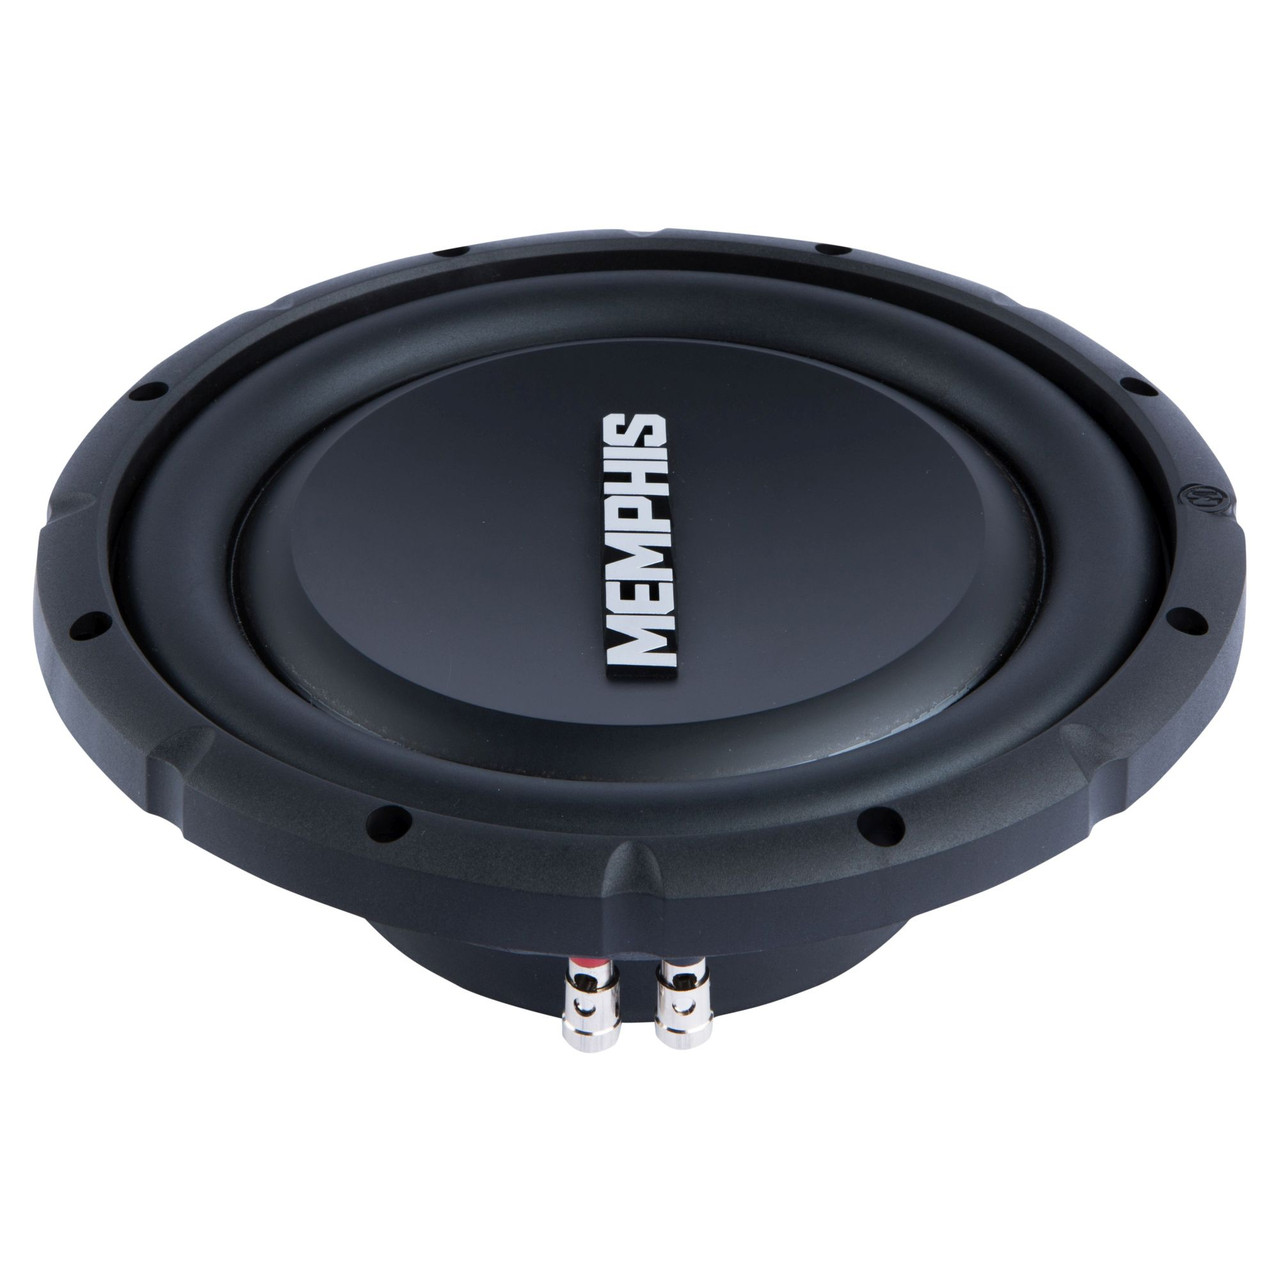 Memphis Audio SRXS1044 10" Street Reference Dual 4-Ohm Shallow Mount  Subwoofer - 250 wRMS - Creative Audio